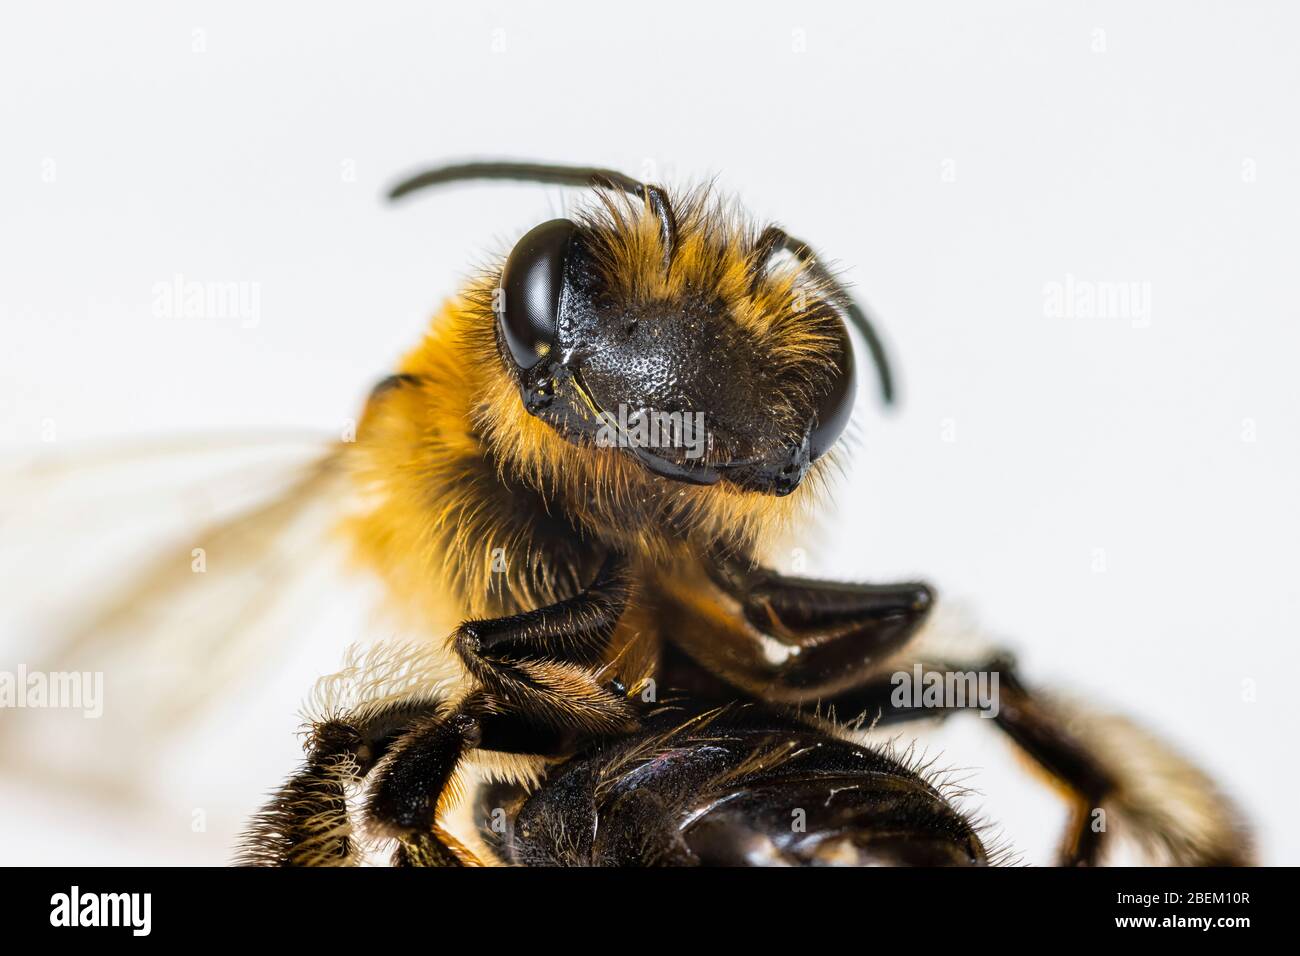 Minibeast: a red mason bee, Osmia bicornis, macro with close-up view of its head, antennae and compound eye, Surrey, England Stock Photo